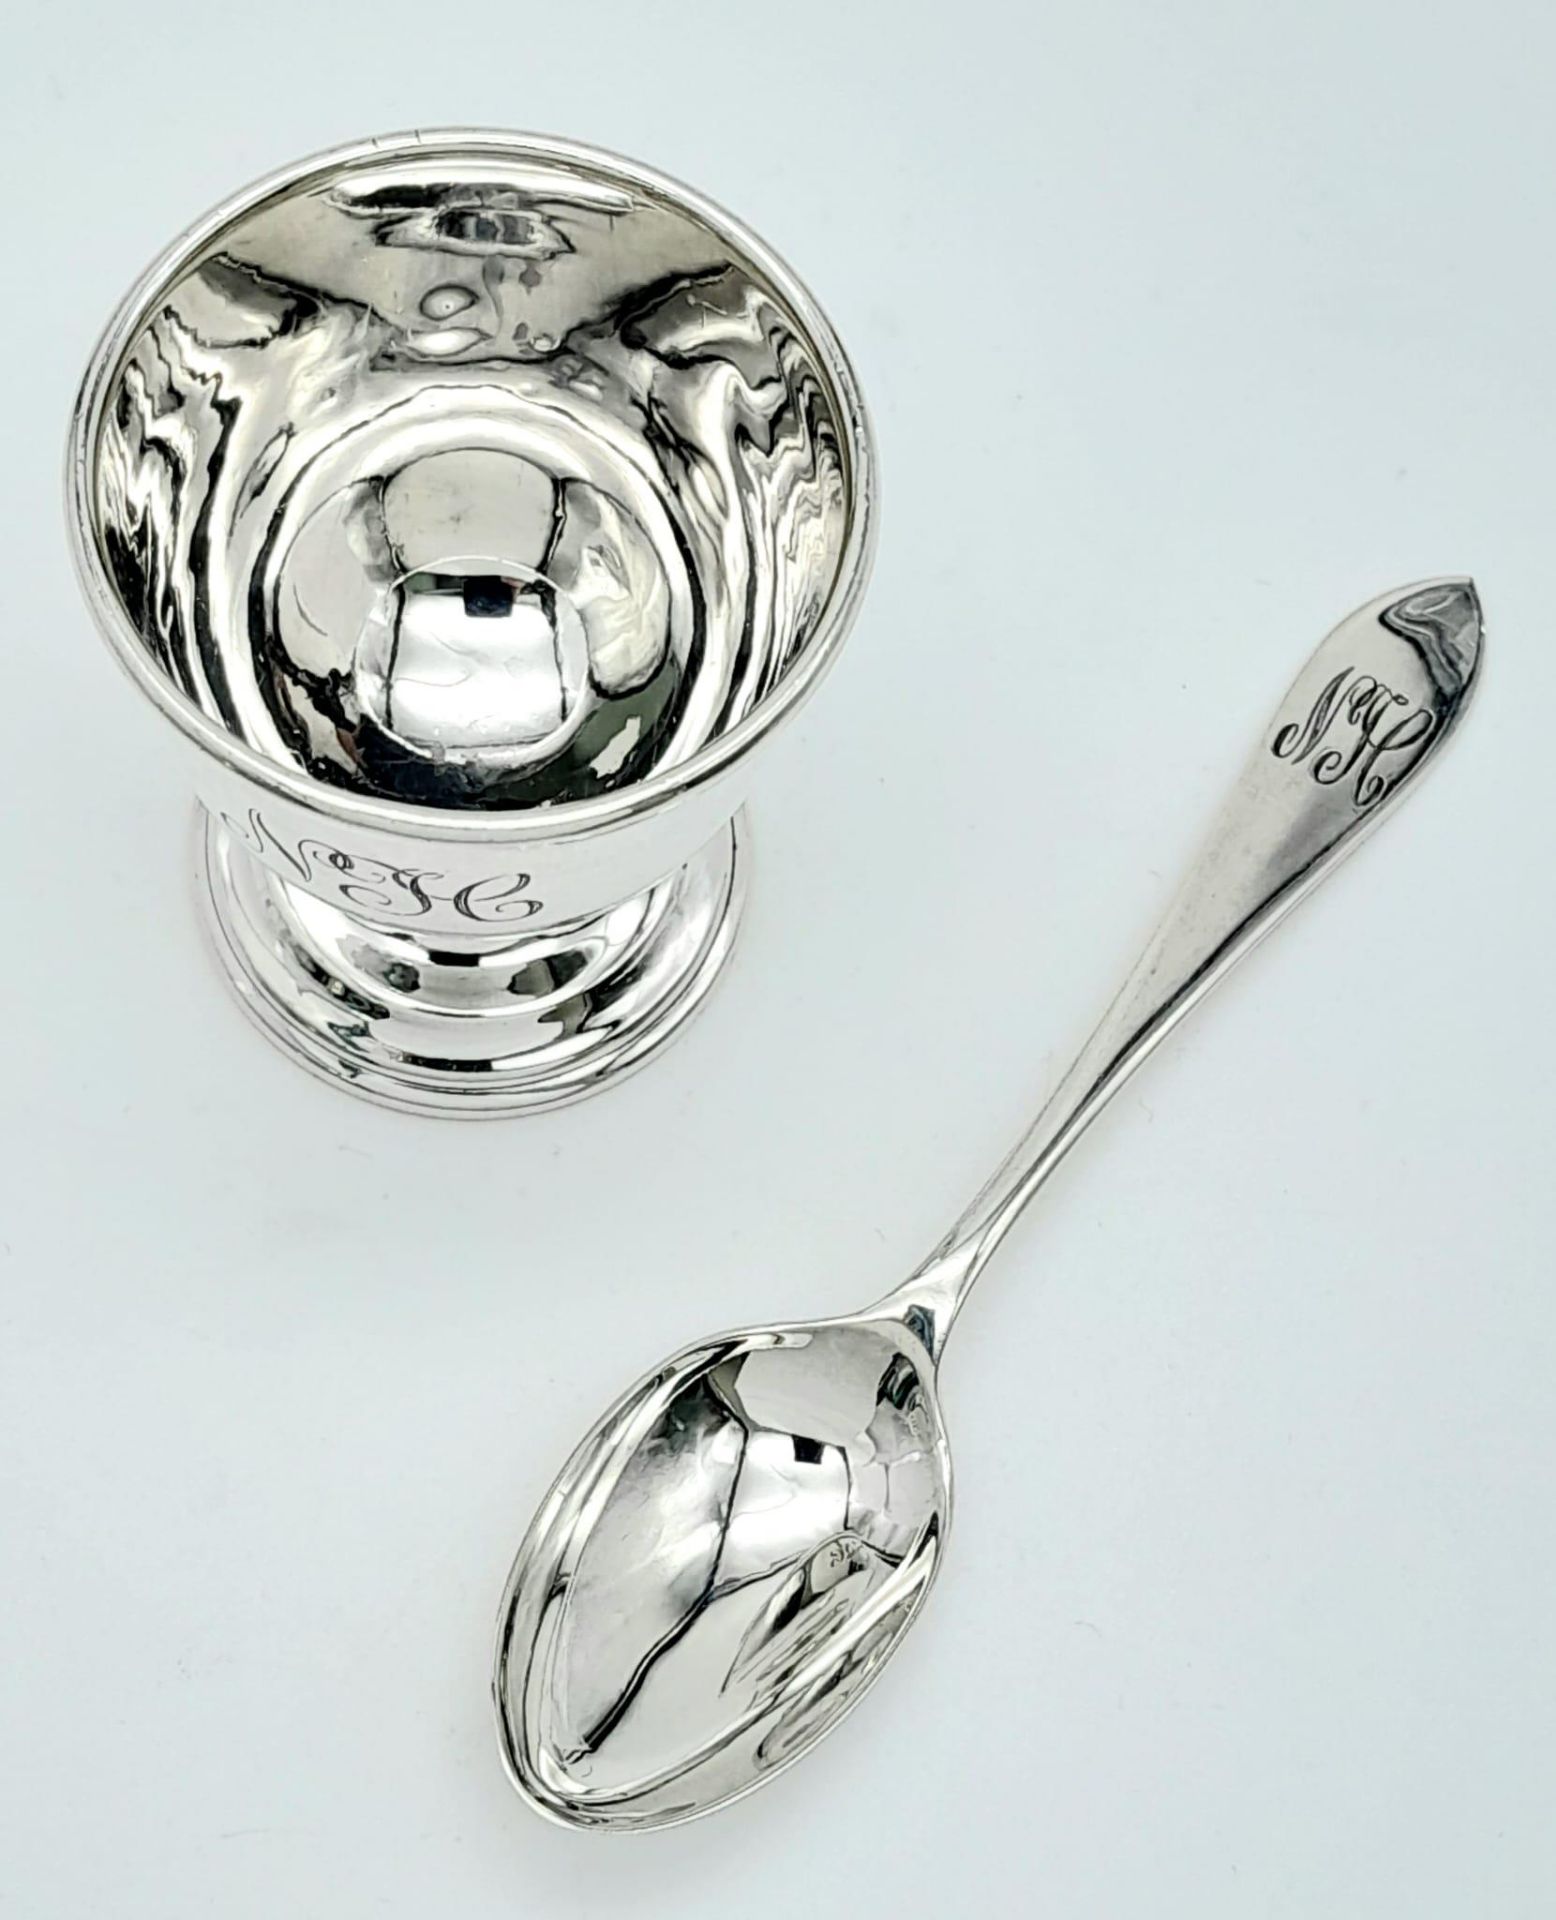 A Vintage Sterling Silver Egg Cup and Spoon. Birmingham hallmarks. 46g total weight. - Image 3 of 7